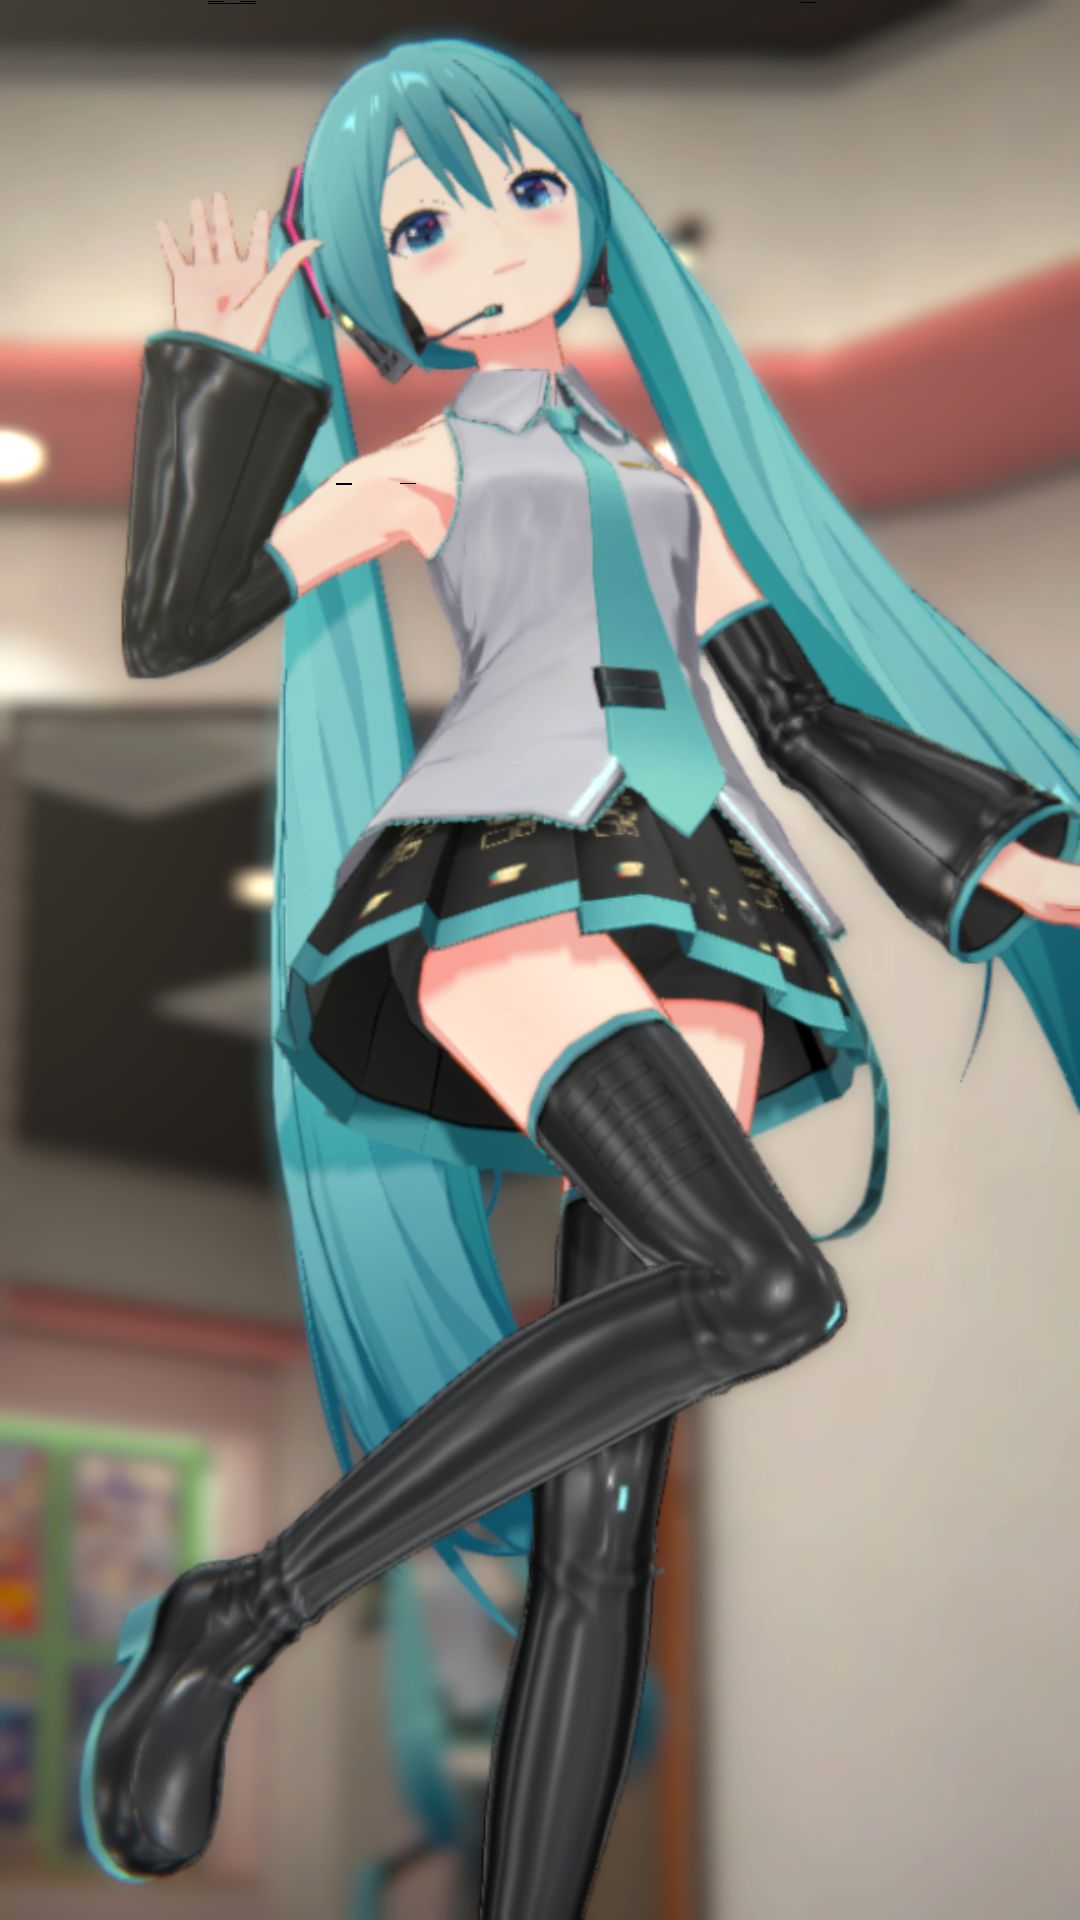 The result of peeking into the contents of the skirt of the smartphone game "IDOLY PRIDE" Hatsune Miku and Hatsune Miku costume 12